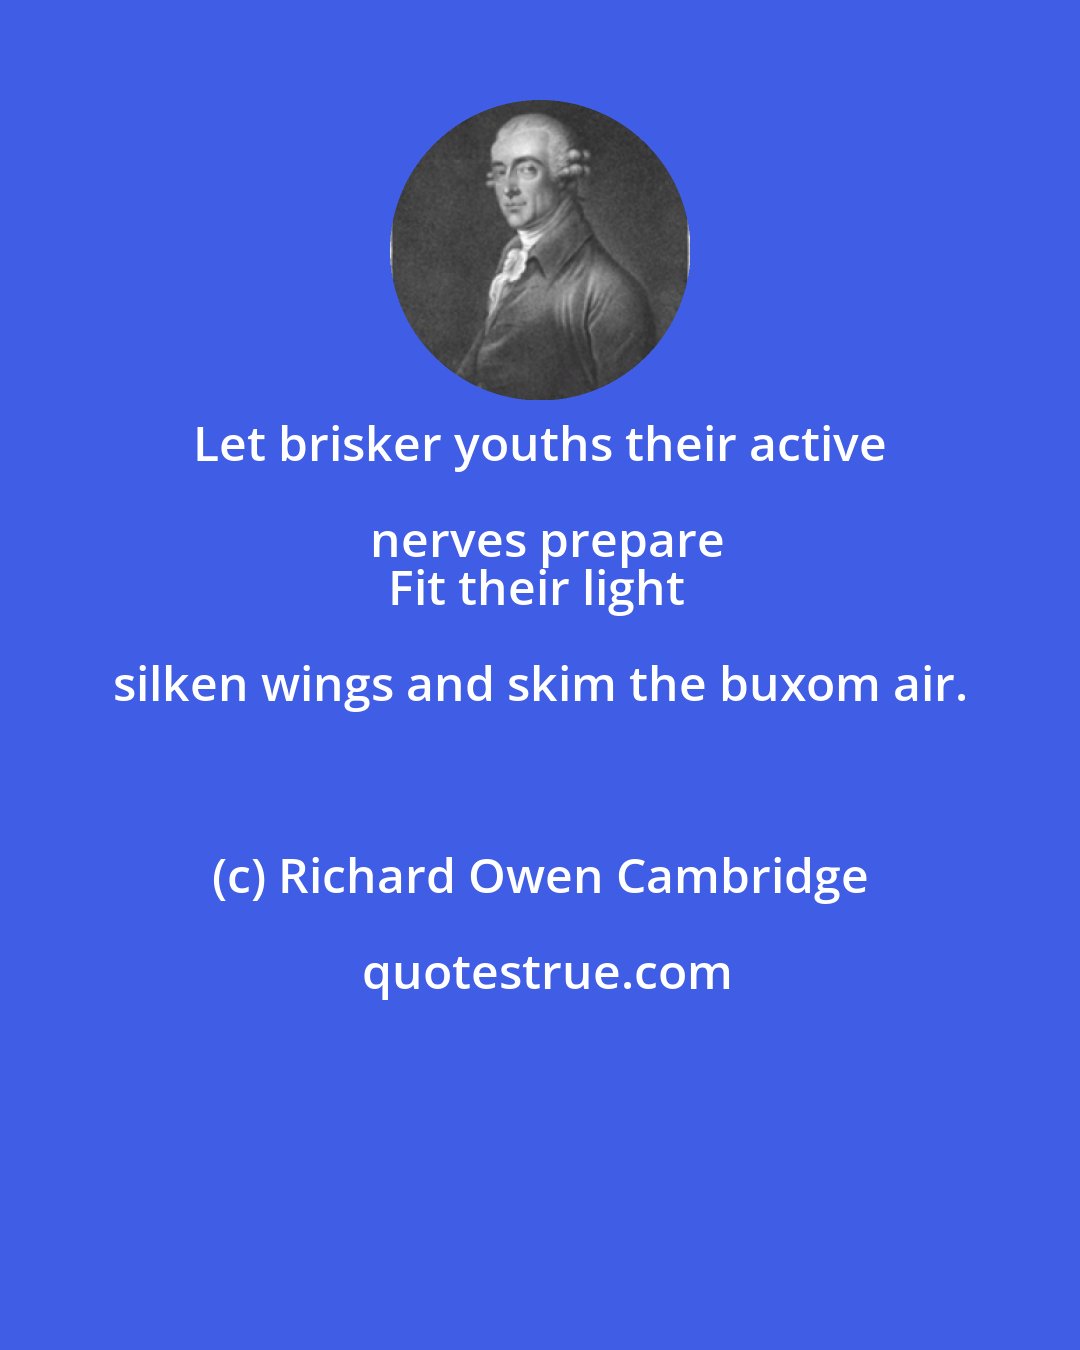 Richard Owen Cambridge: Let brisker youths their active nerves prepare
Fit their light silken wings and skim the buxom air.